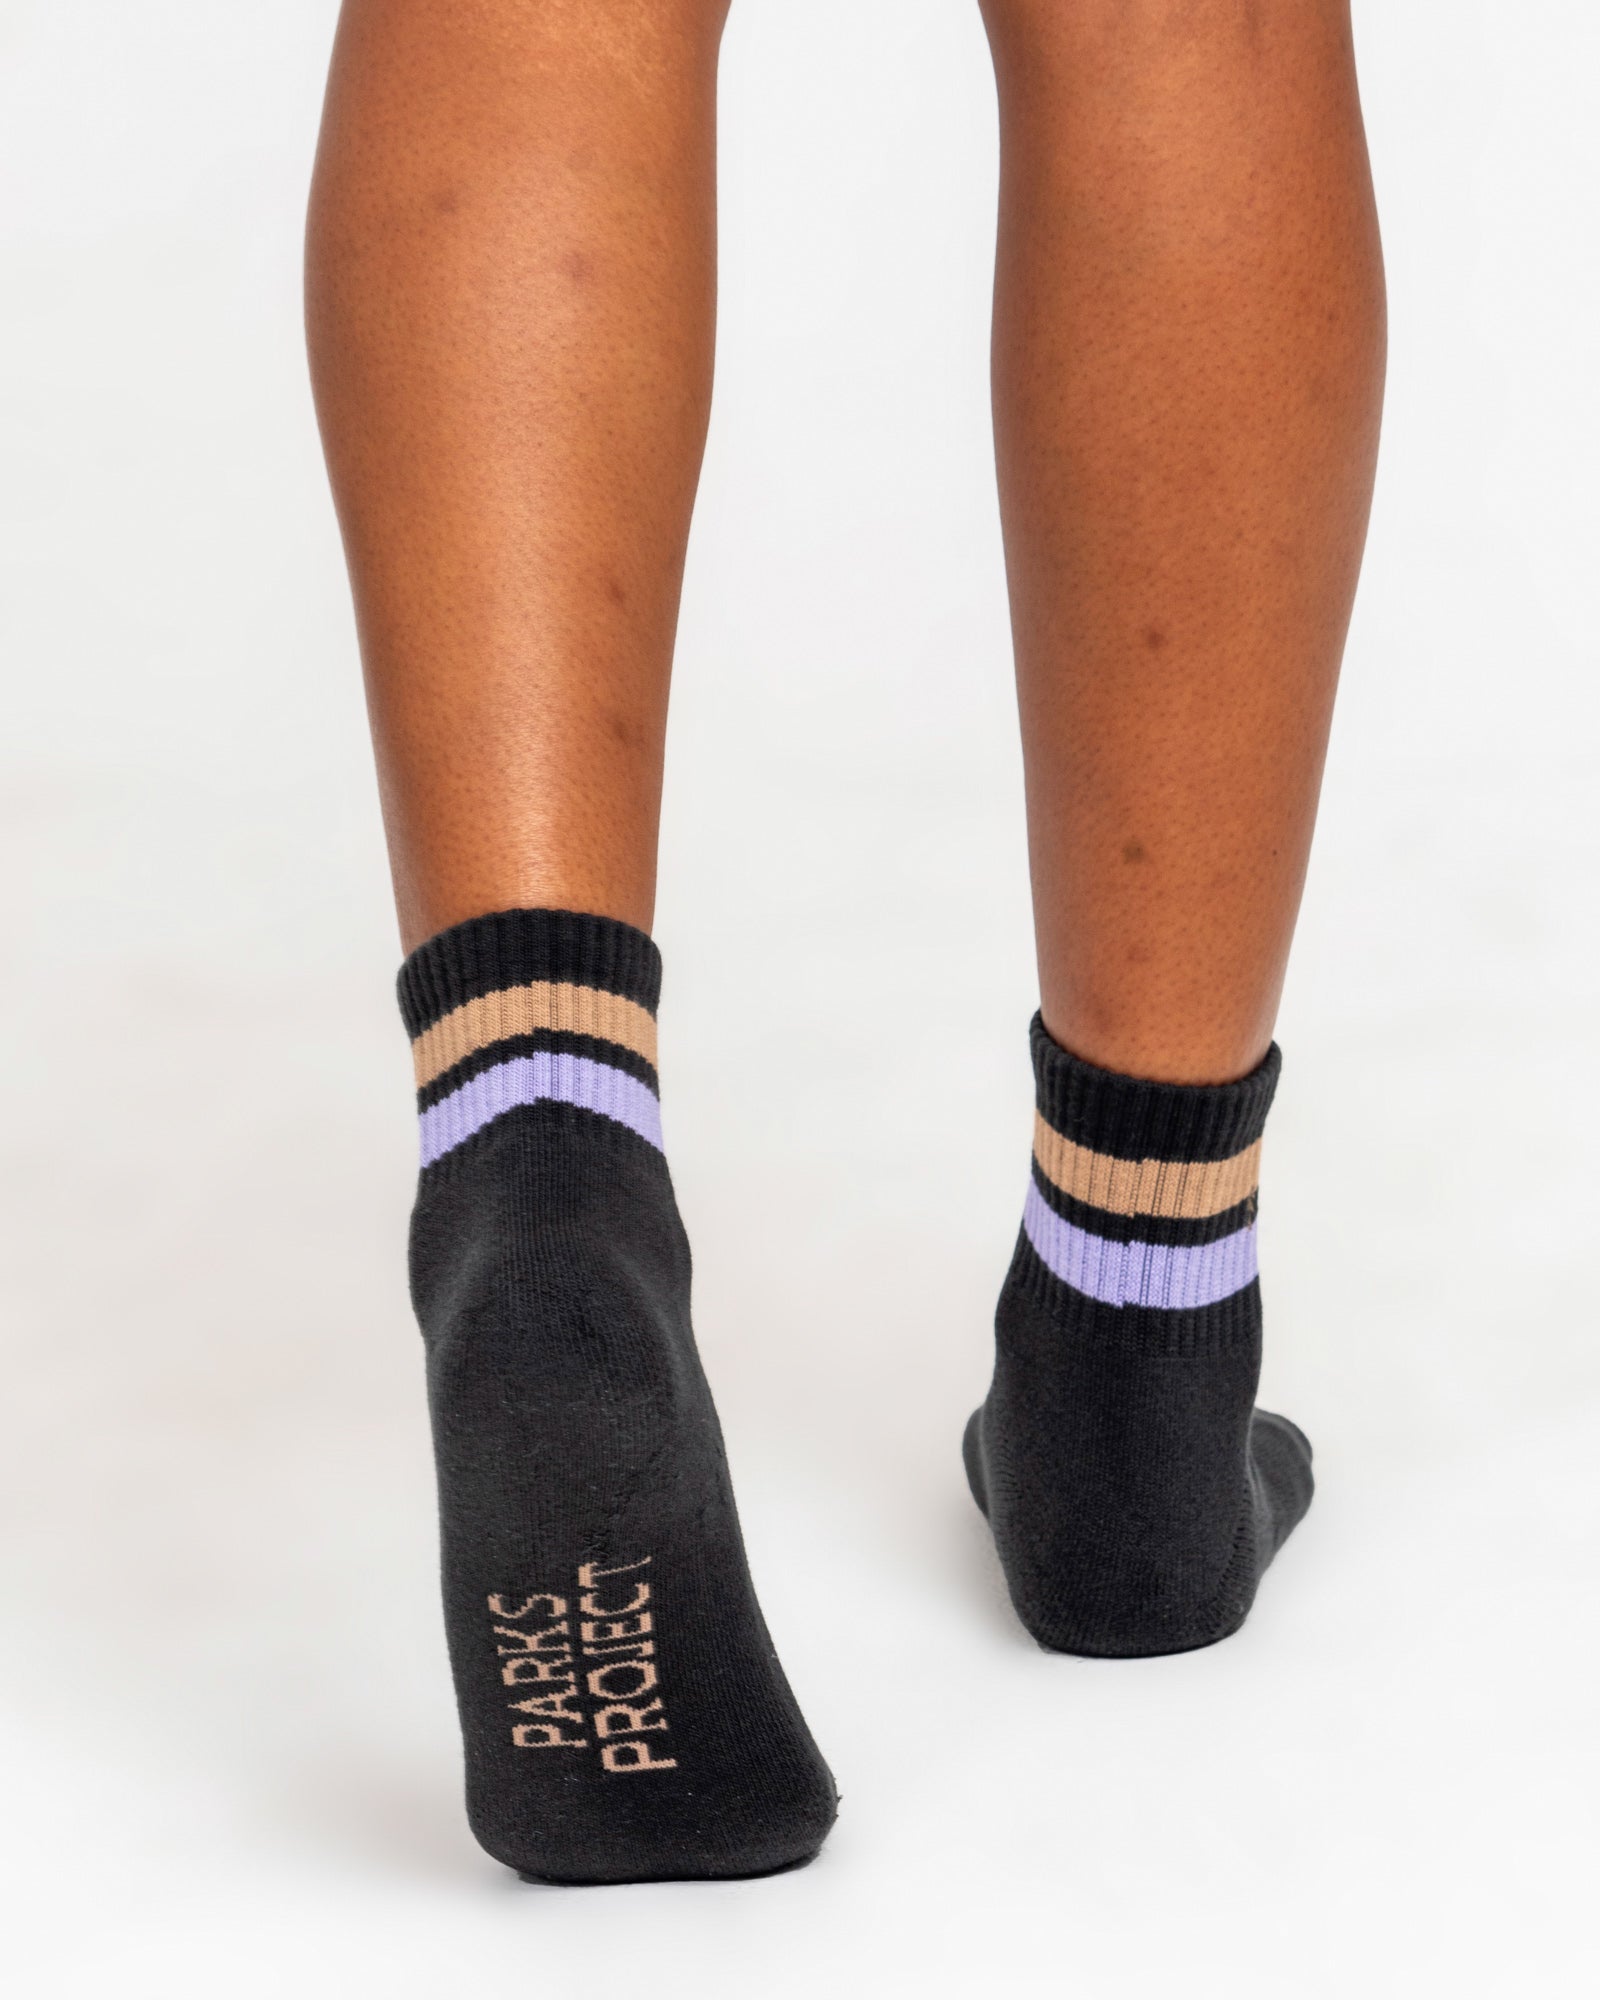 $20 - Project K-9 Hero Socks by Authentically American